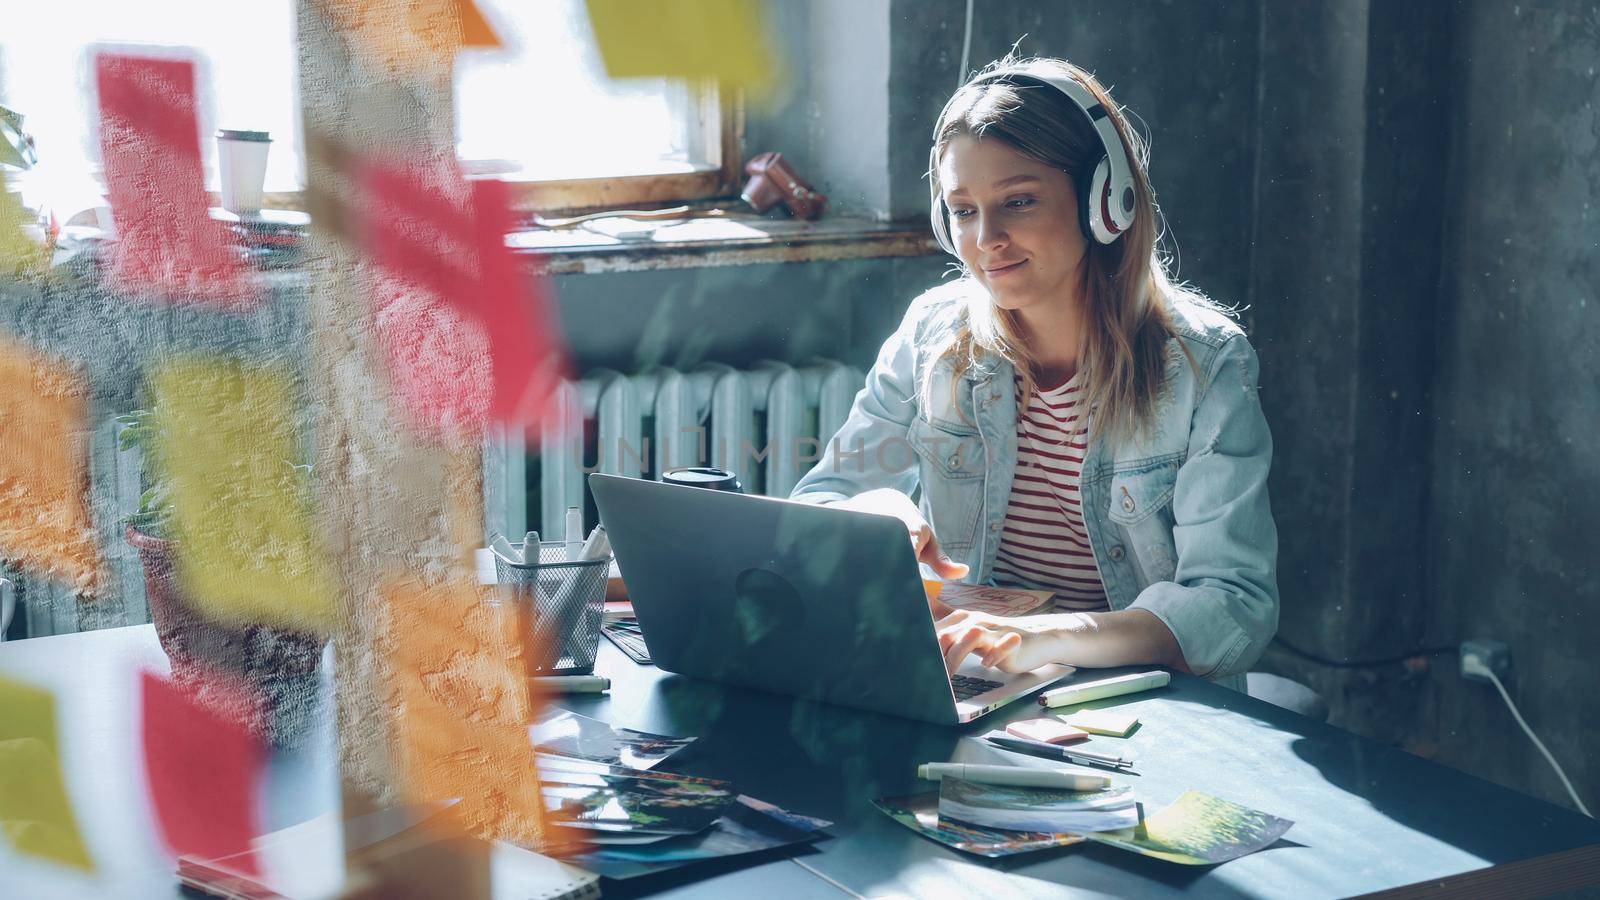 Creative young businesswoman is listening to music in headphones dancing while working at desk with laptop in modern office indoors. Glass with colored stickers in foreground.